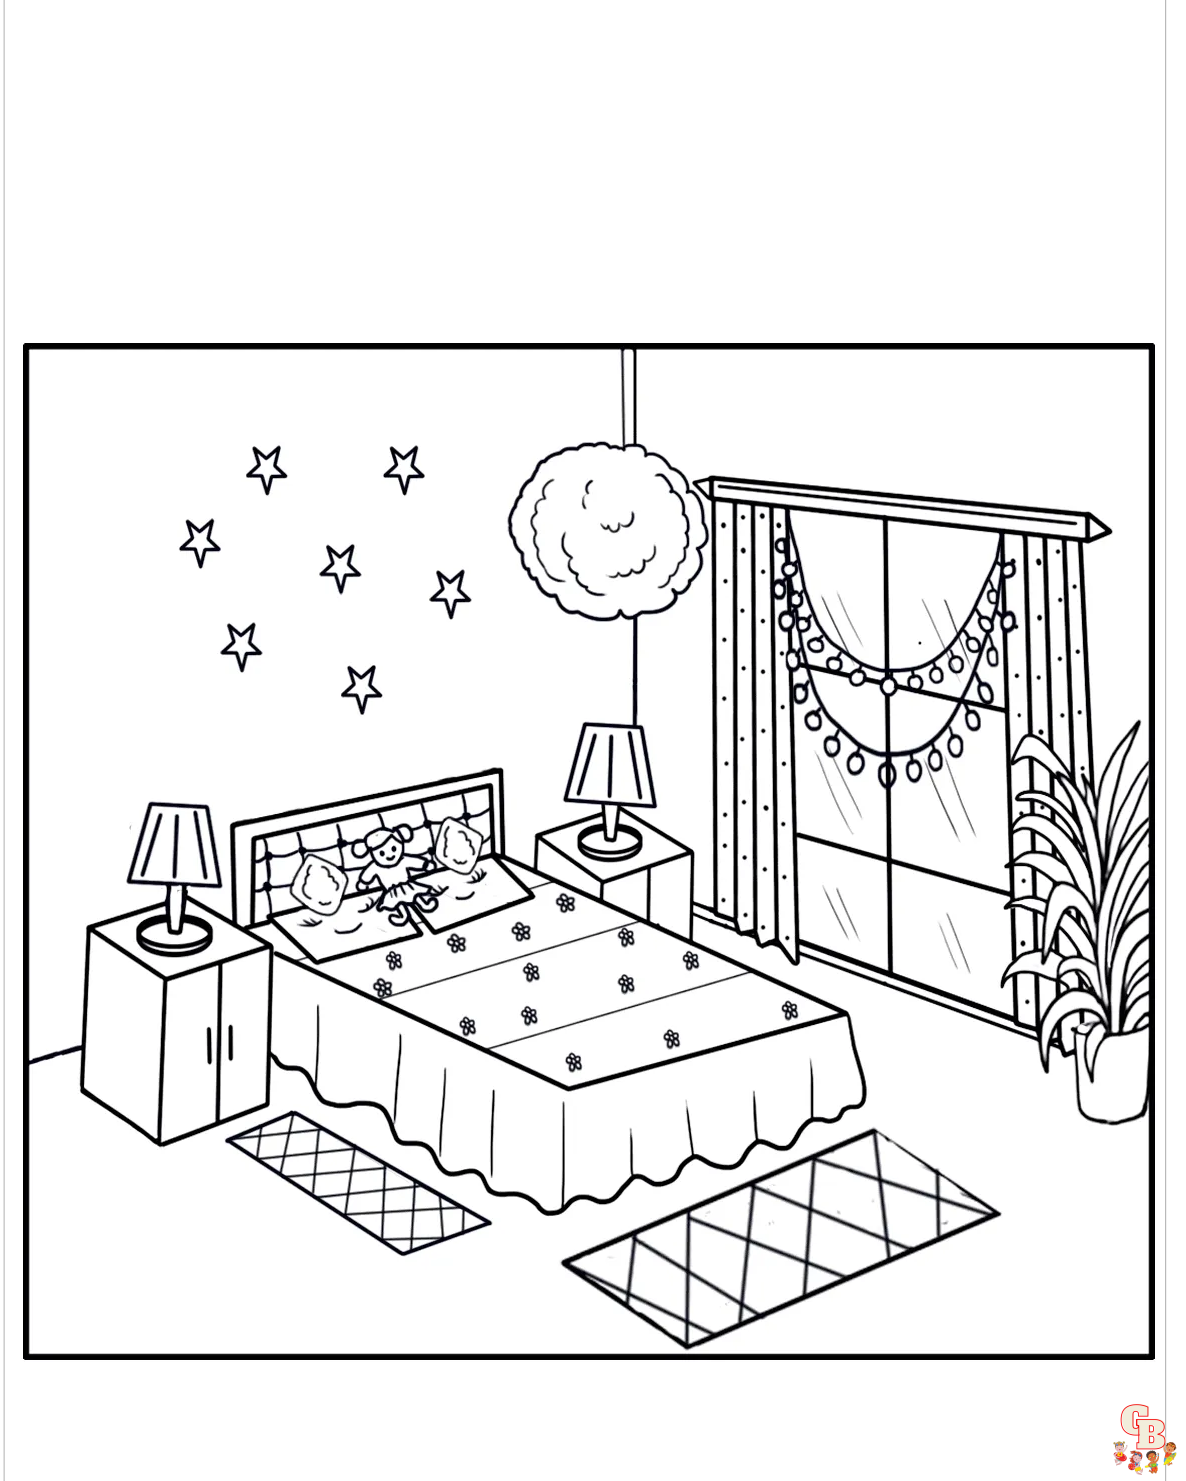 Relax and Unwind with Bedroom Coloring Pages - Free Printable